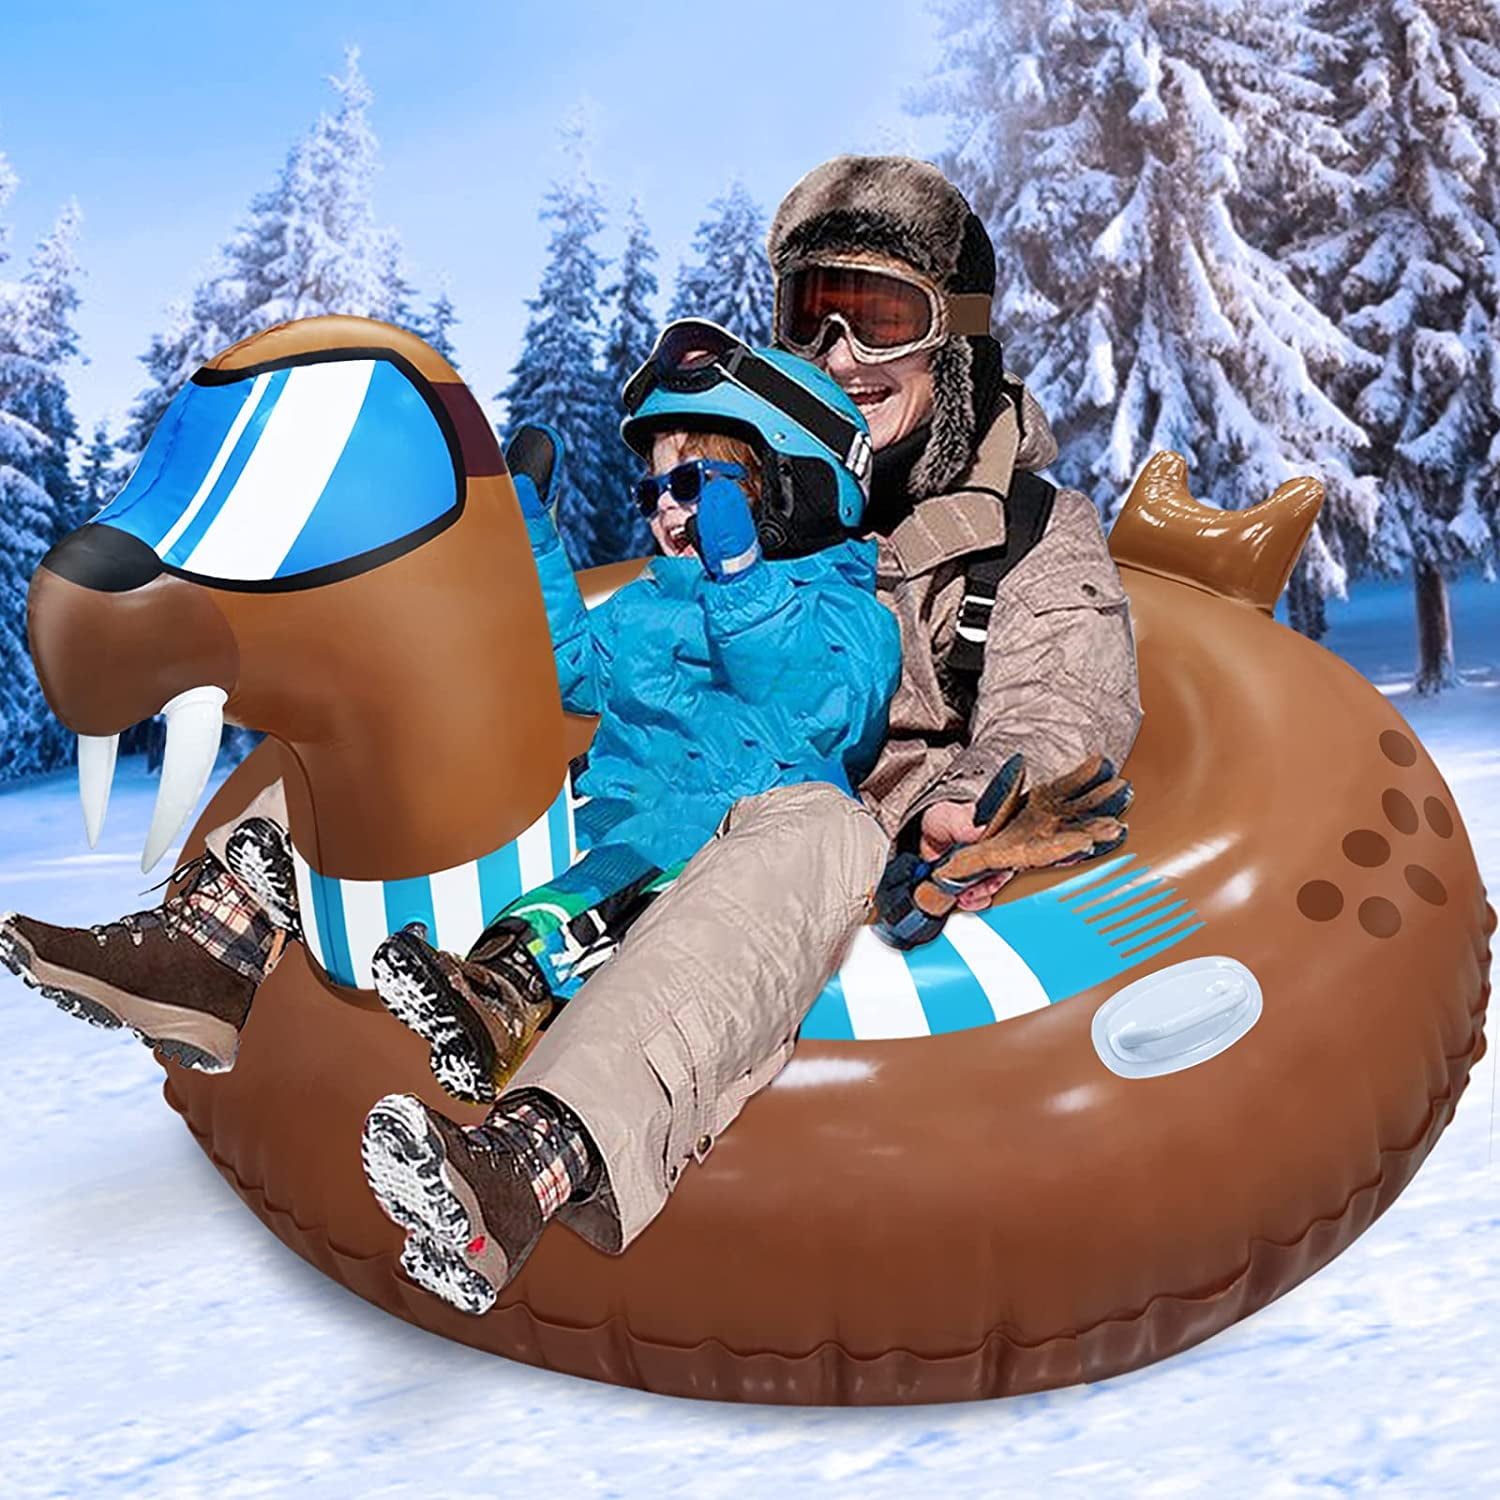 Inflatable 47 Inch Heavy Duty Snow Sleds for Kids and Adults Sled Tire Tube with Handles Outdoor Winter Snow Sledding Equipment FRSH MNT Snow Tube for Winter Fun 